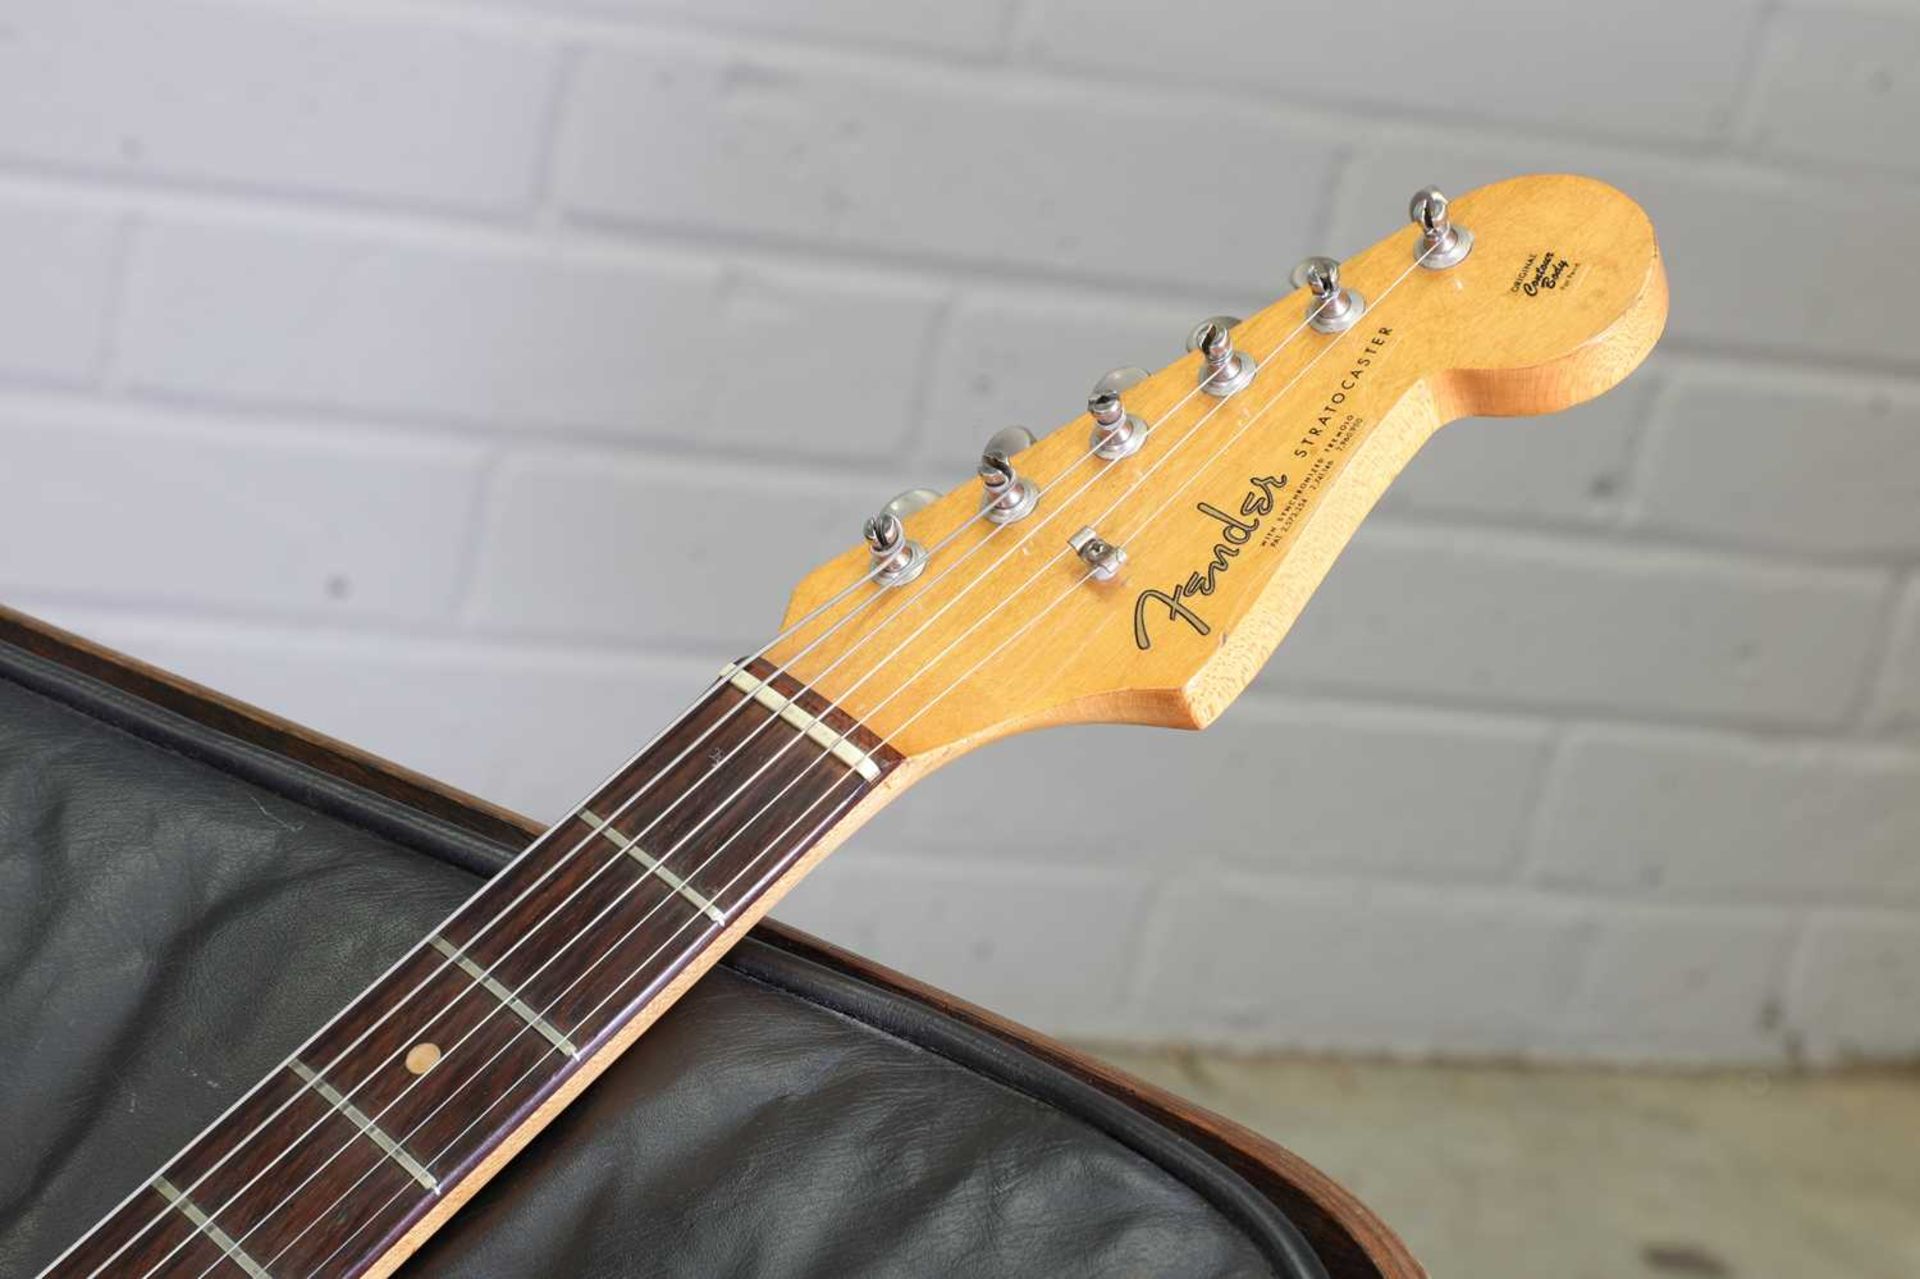 A 1963 Fender Stratocaster electric guitar, - Image 11 of 32